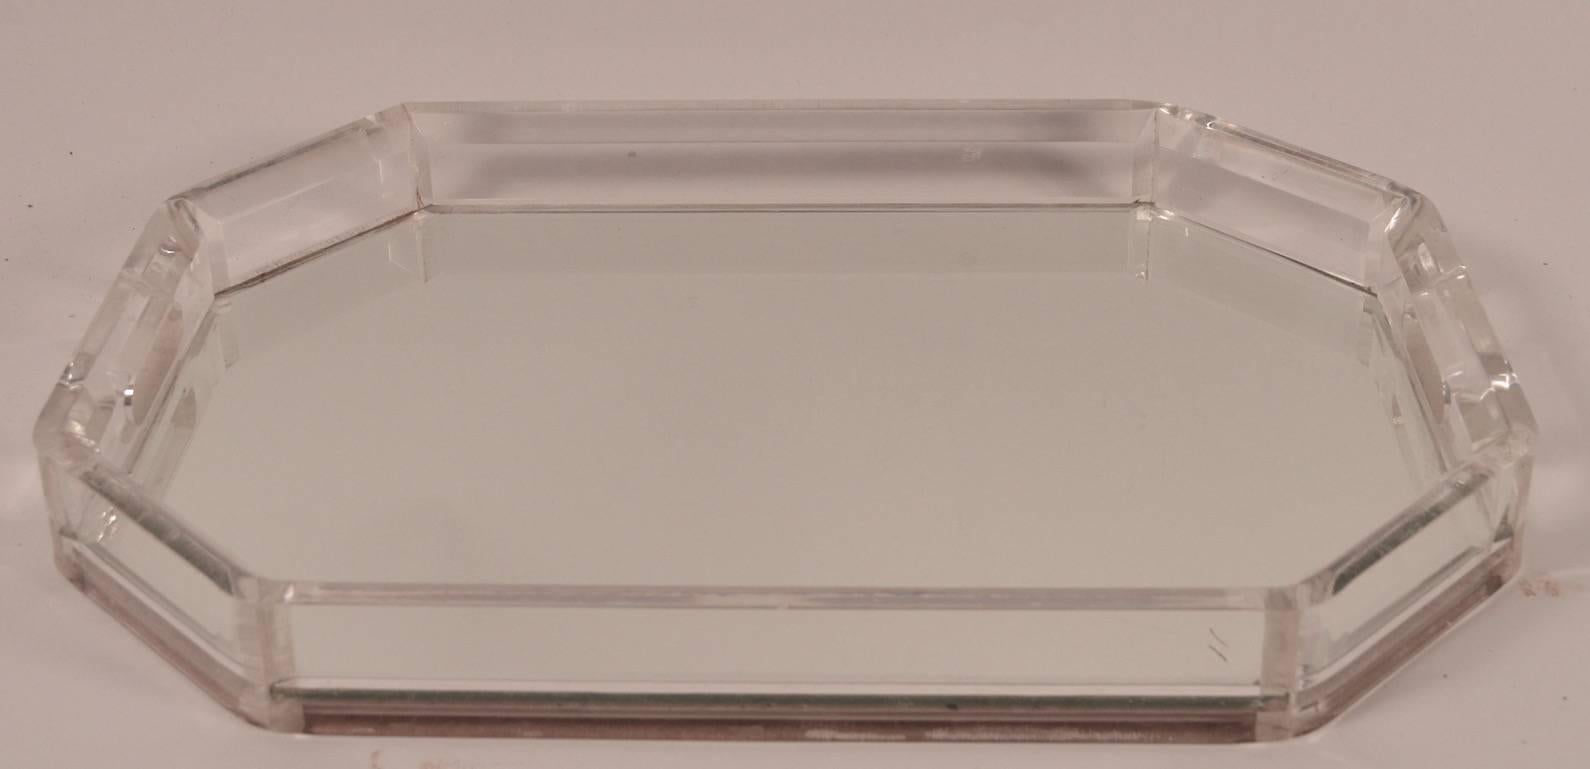 Hollywood Regency Lucite Tray with Mirrored Surface